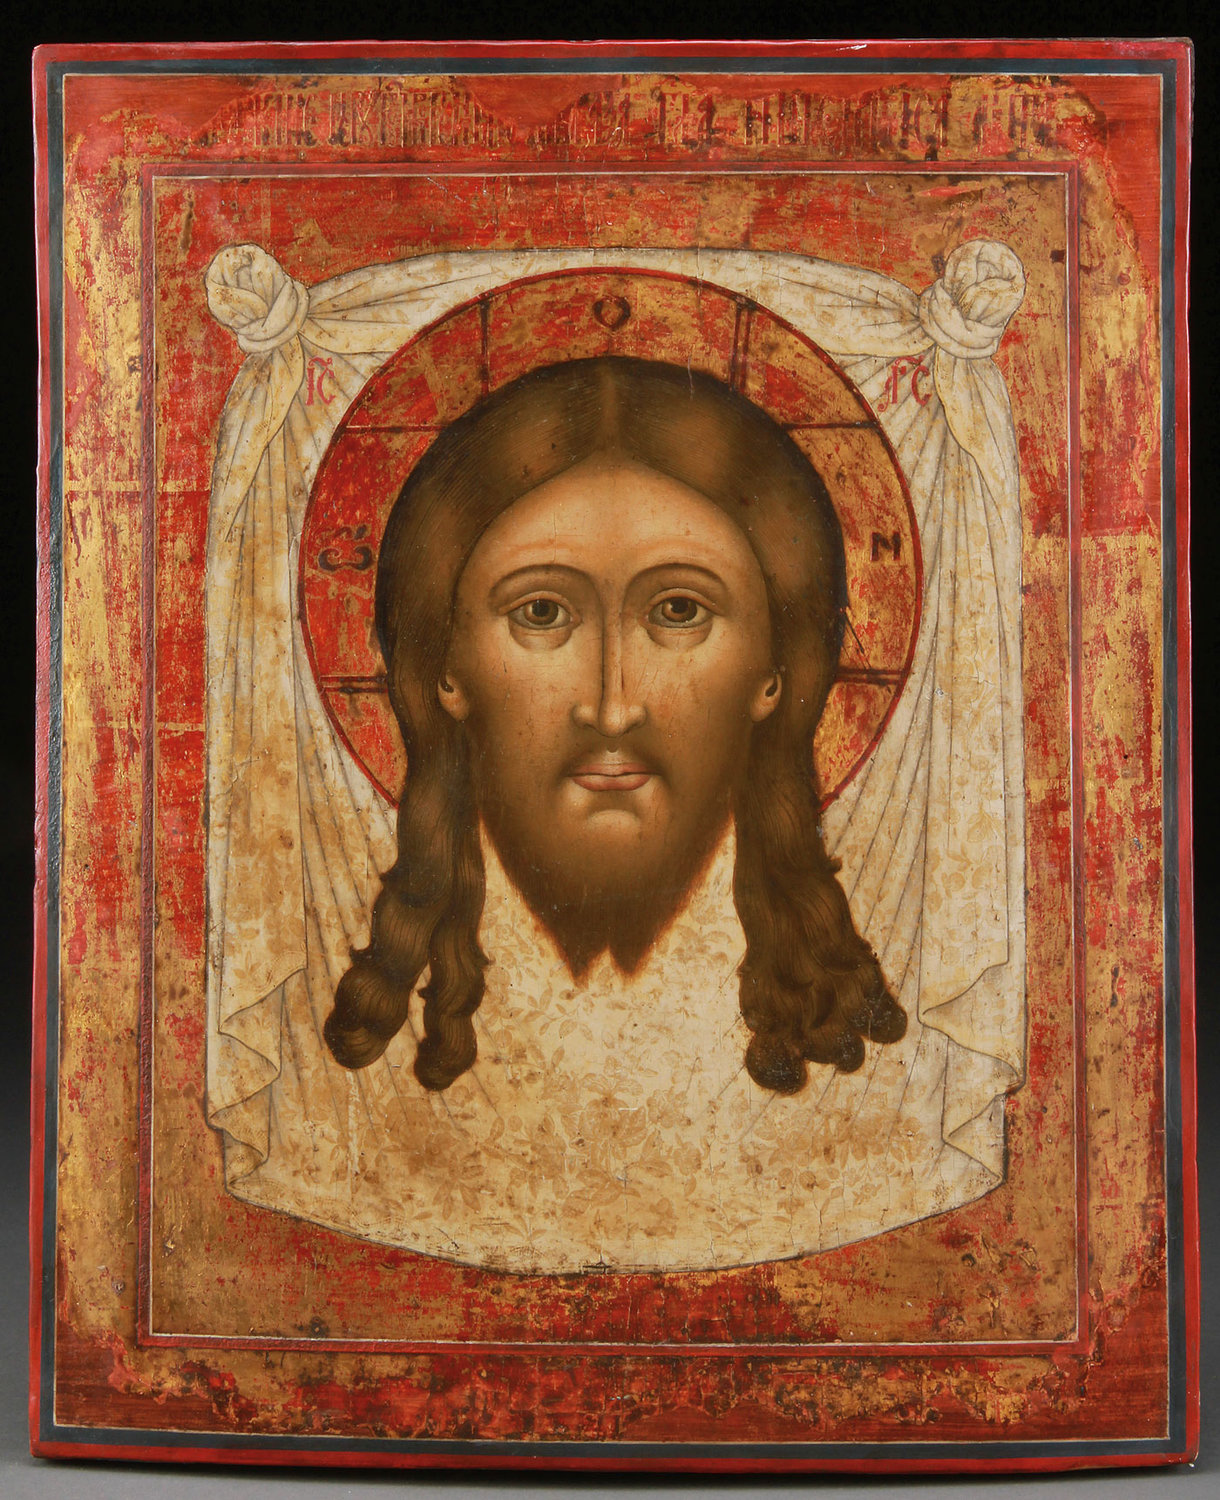 The Image Not Made by Hands, 1800s, anonymous artist, egg tempera on wood, 16 inches x 8.5 inches x 1.5 inches.